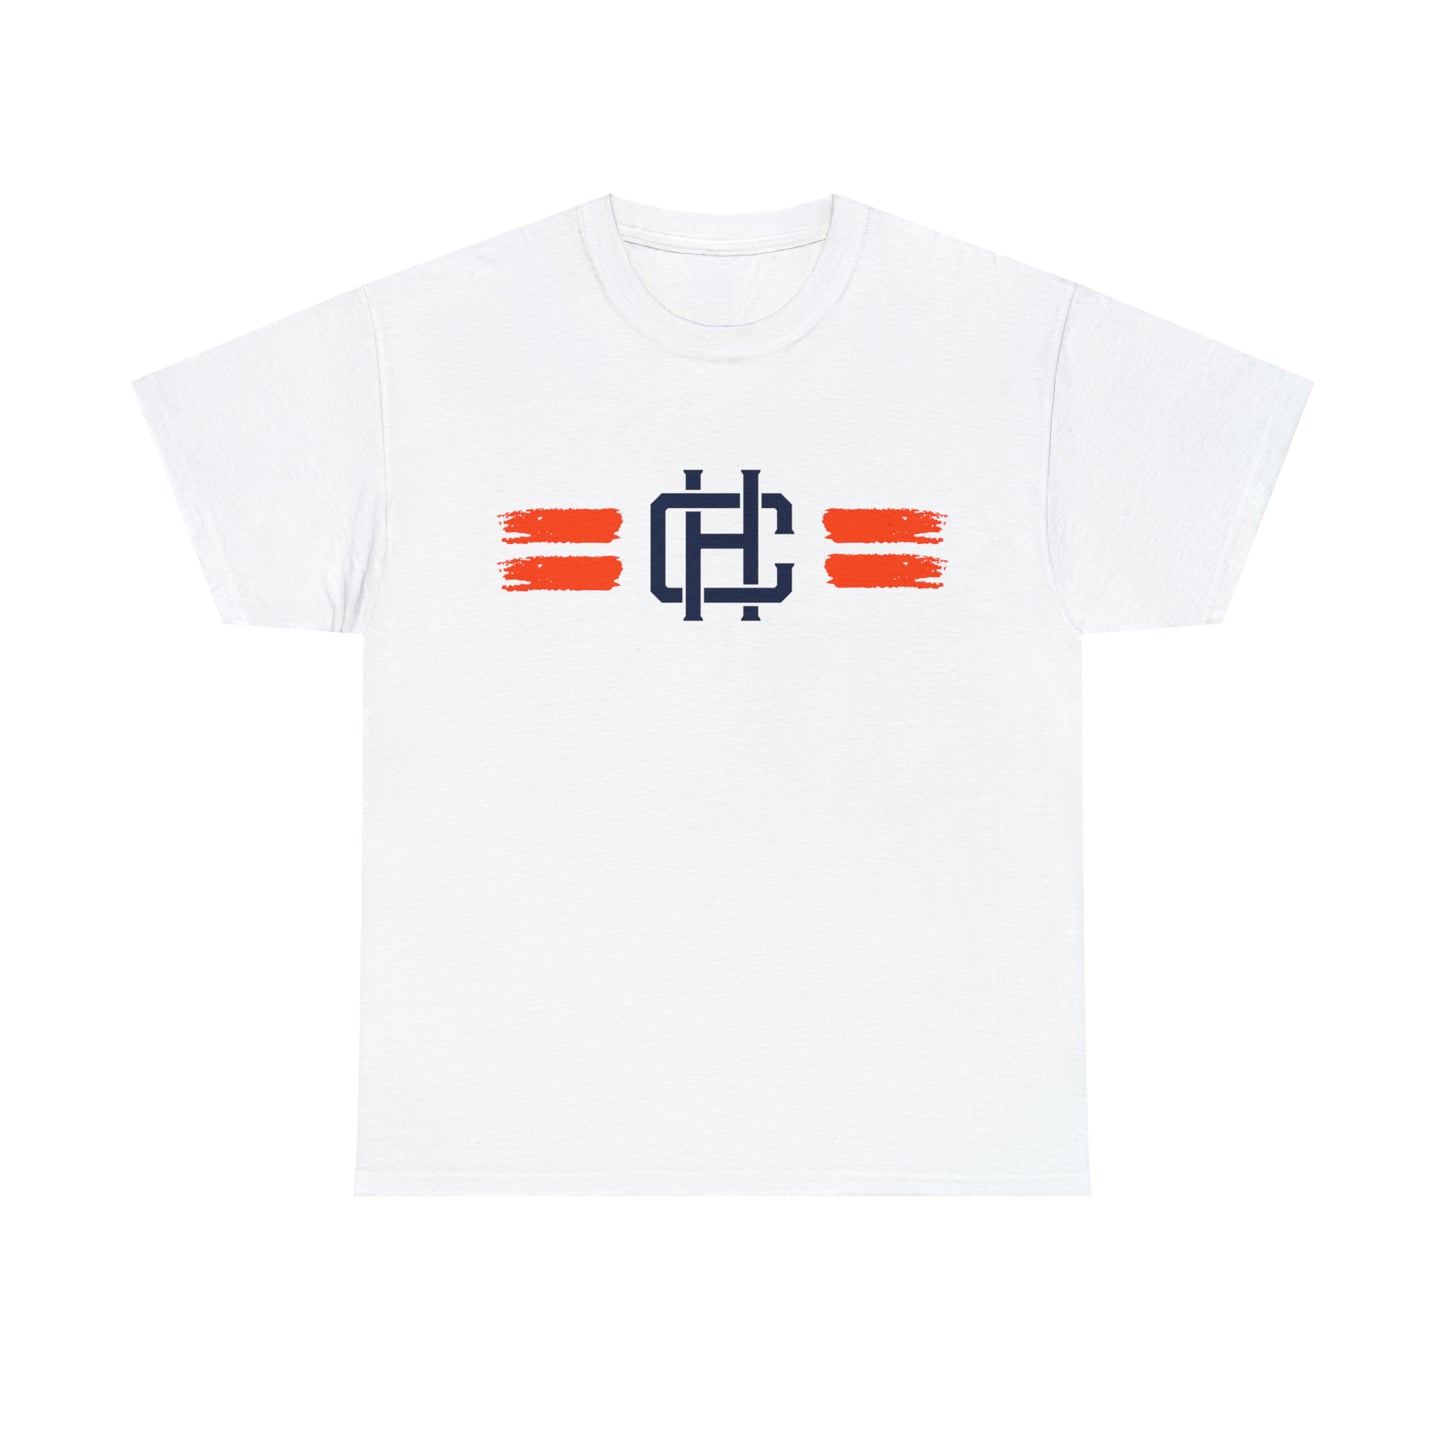 Chase Hungate Team Colors Tee